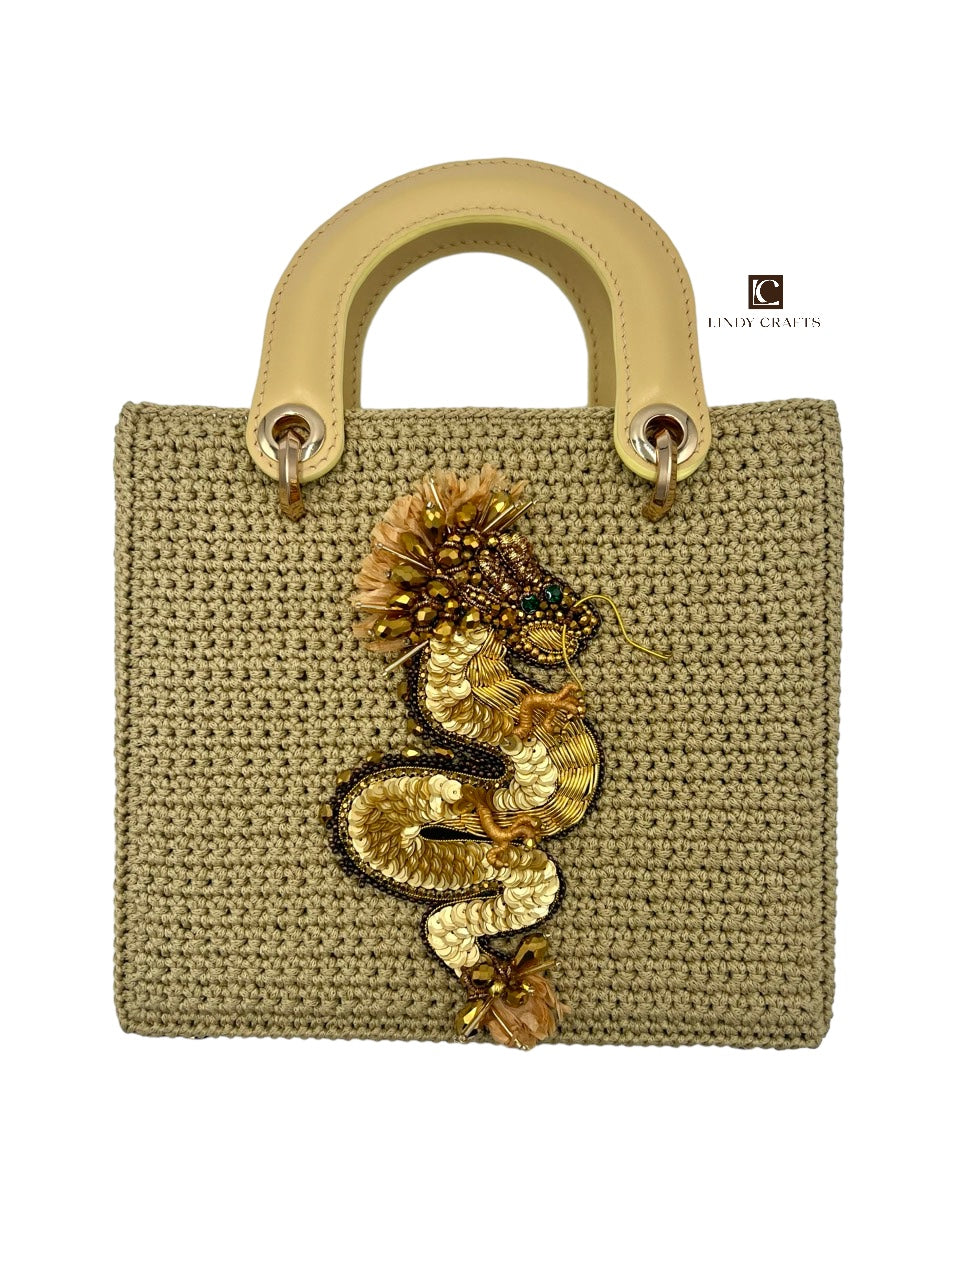 Dragon Bags symbolize strength, power, wealth